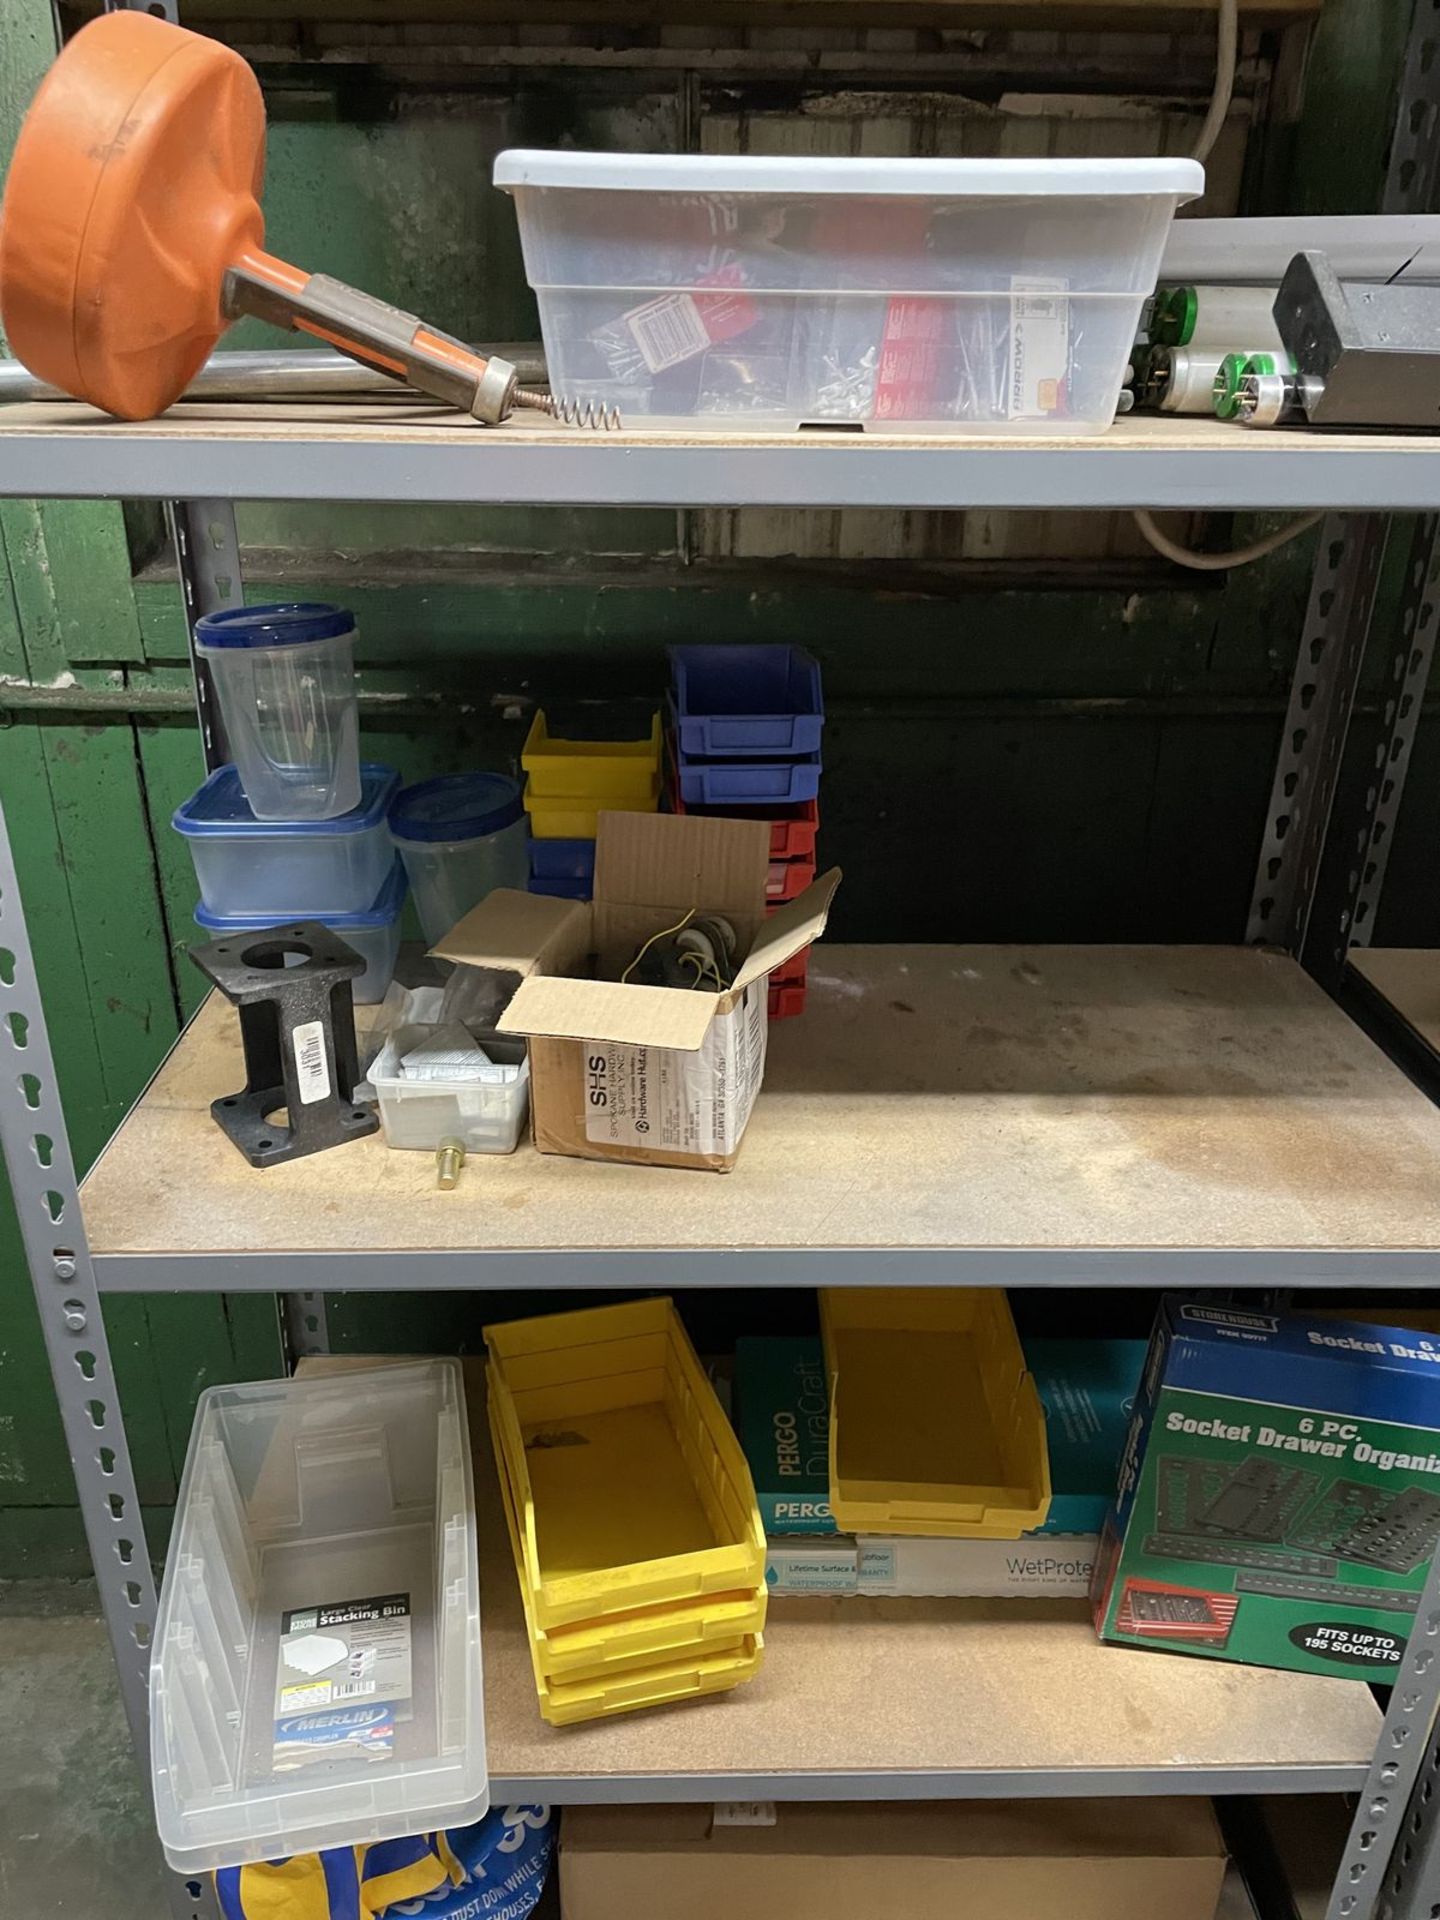 Metal Shelving with Contents on and in Front of Shelving - Image 6 of 7